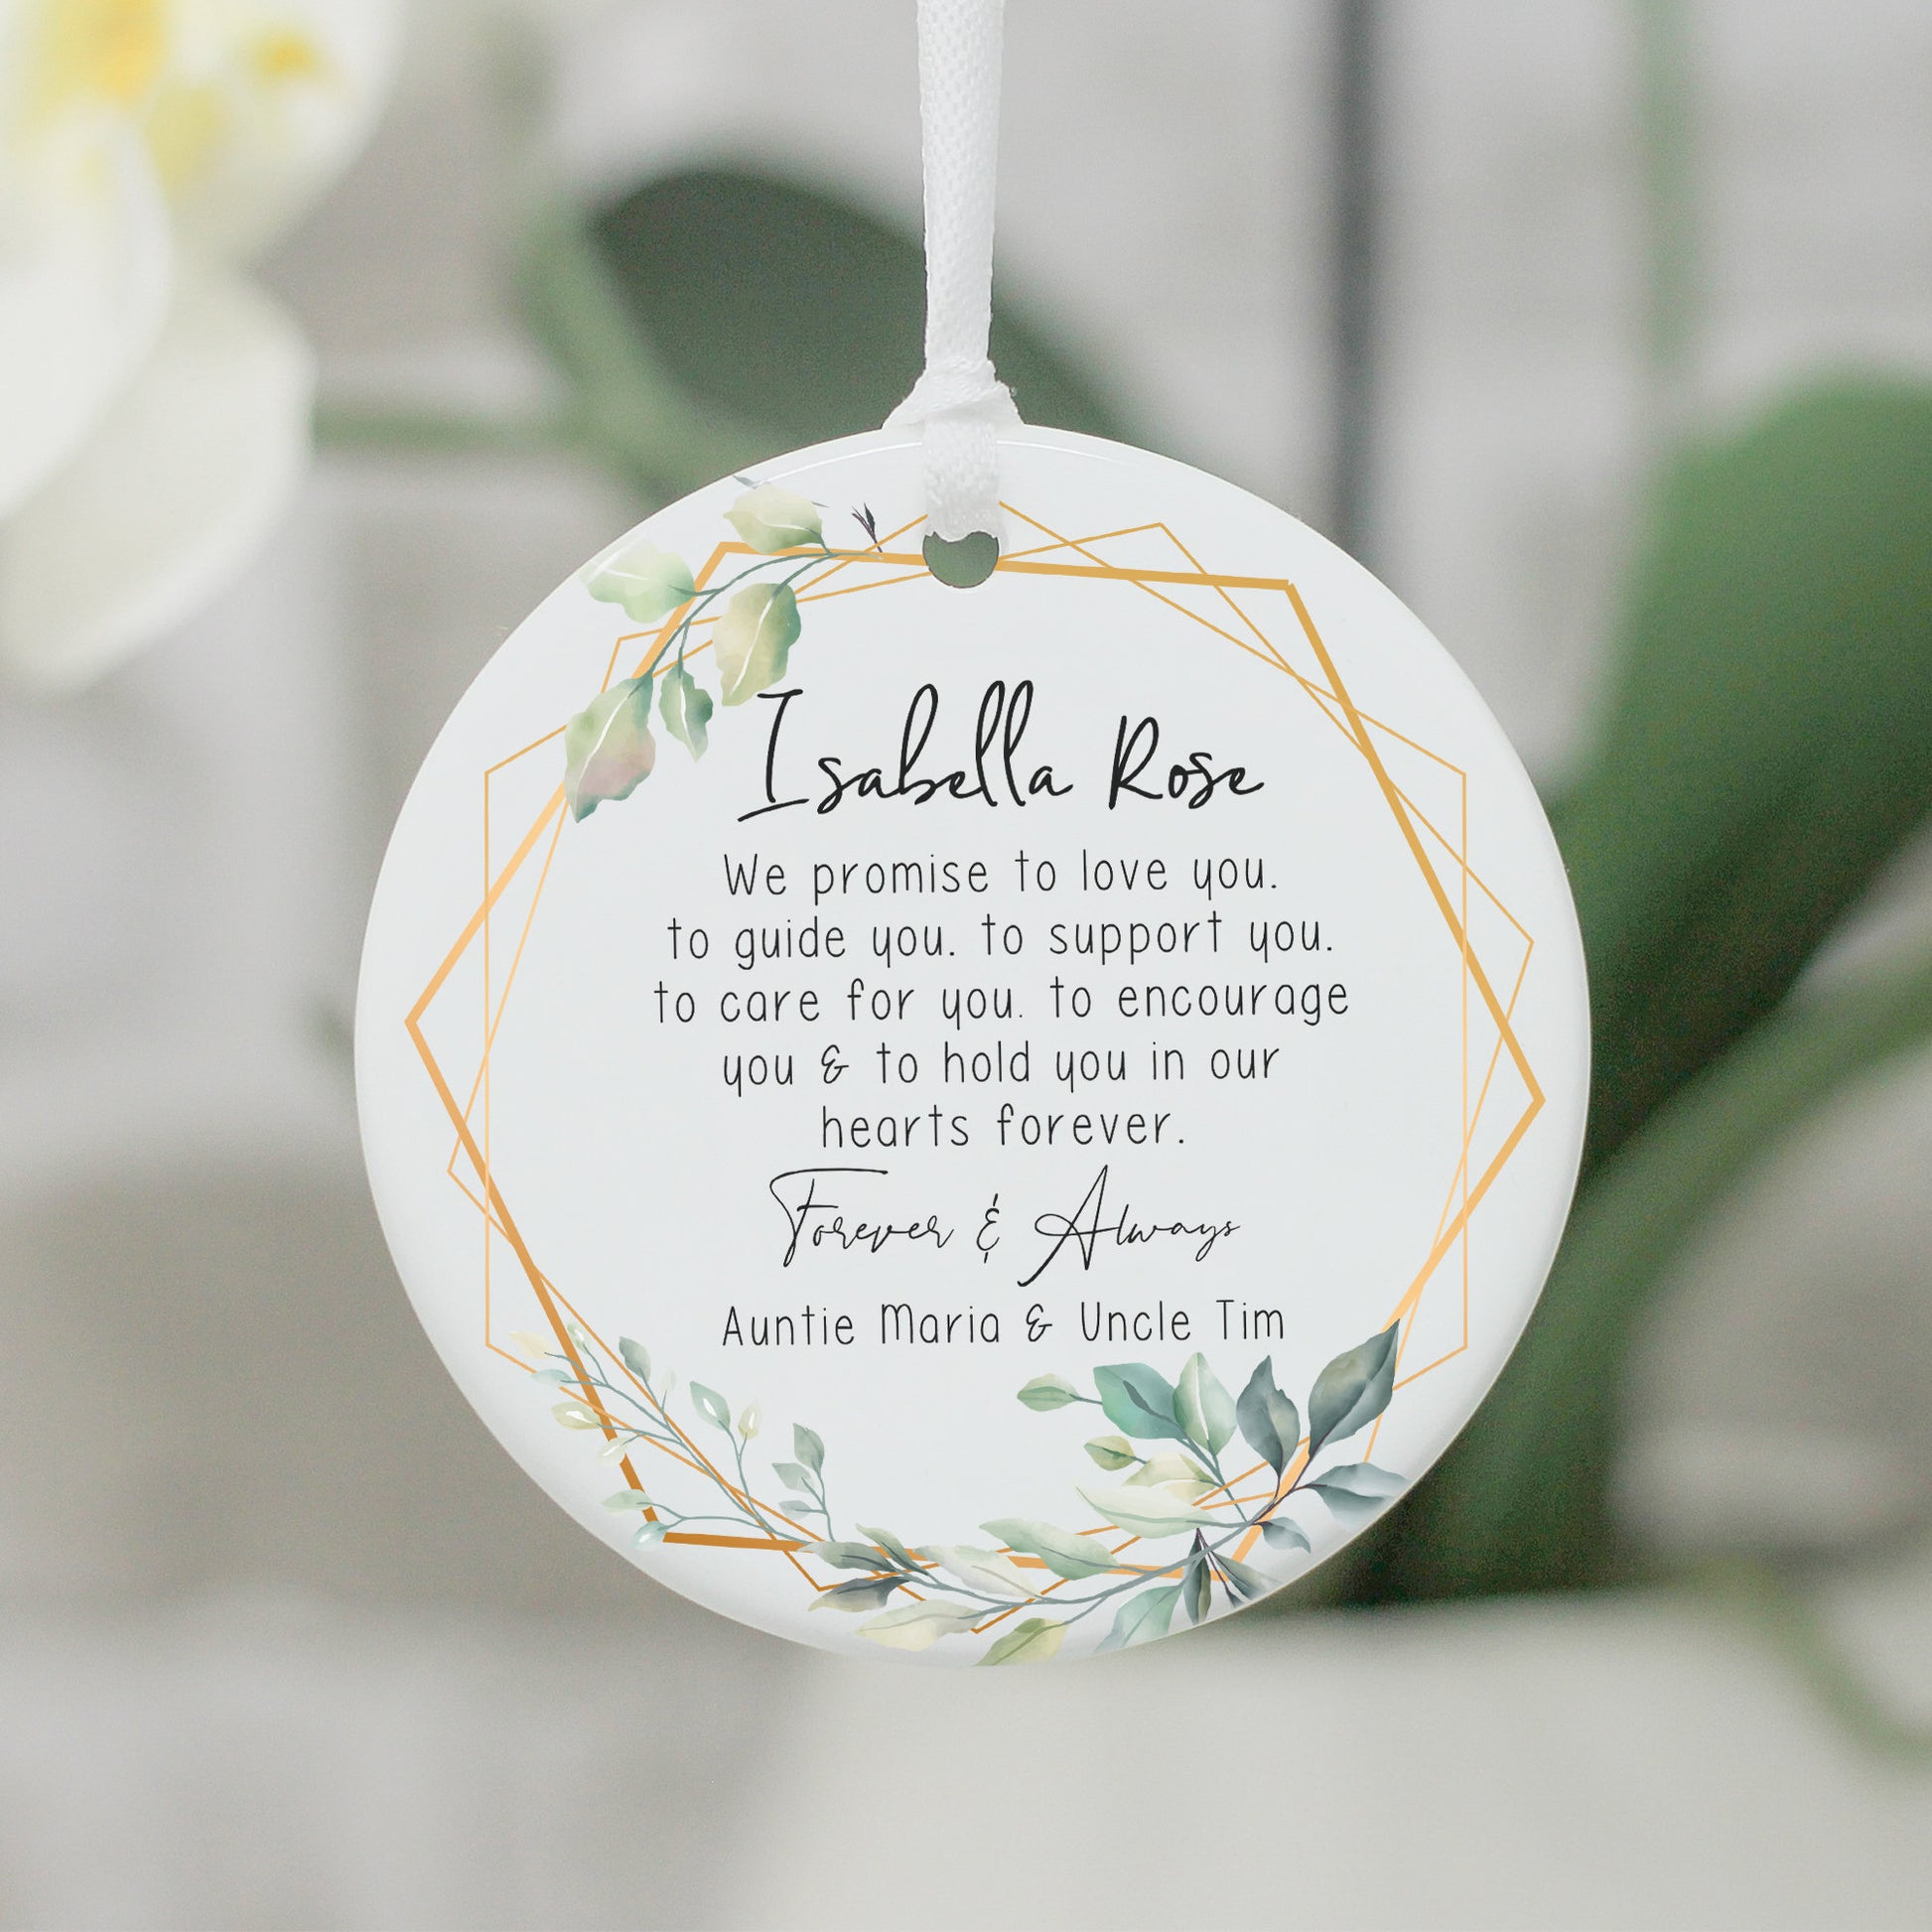 Personalised Godparents Floral Keepsake Gift, Godfather Godmother Ornament Decoration - From Willow | Personalised Gifts